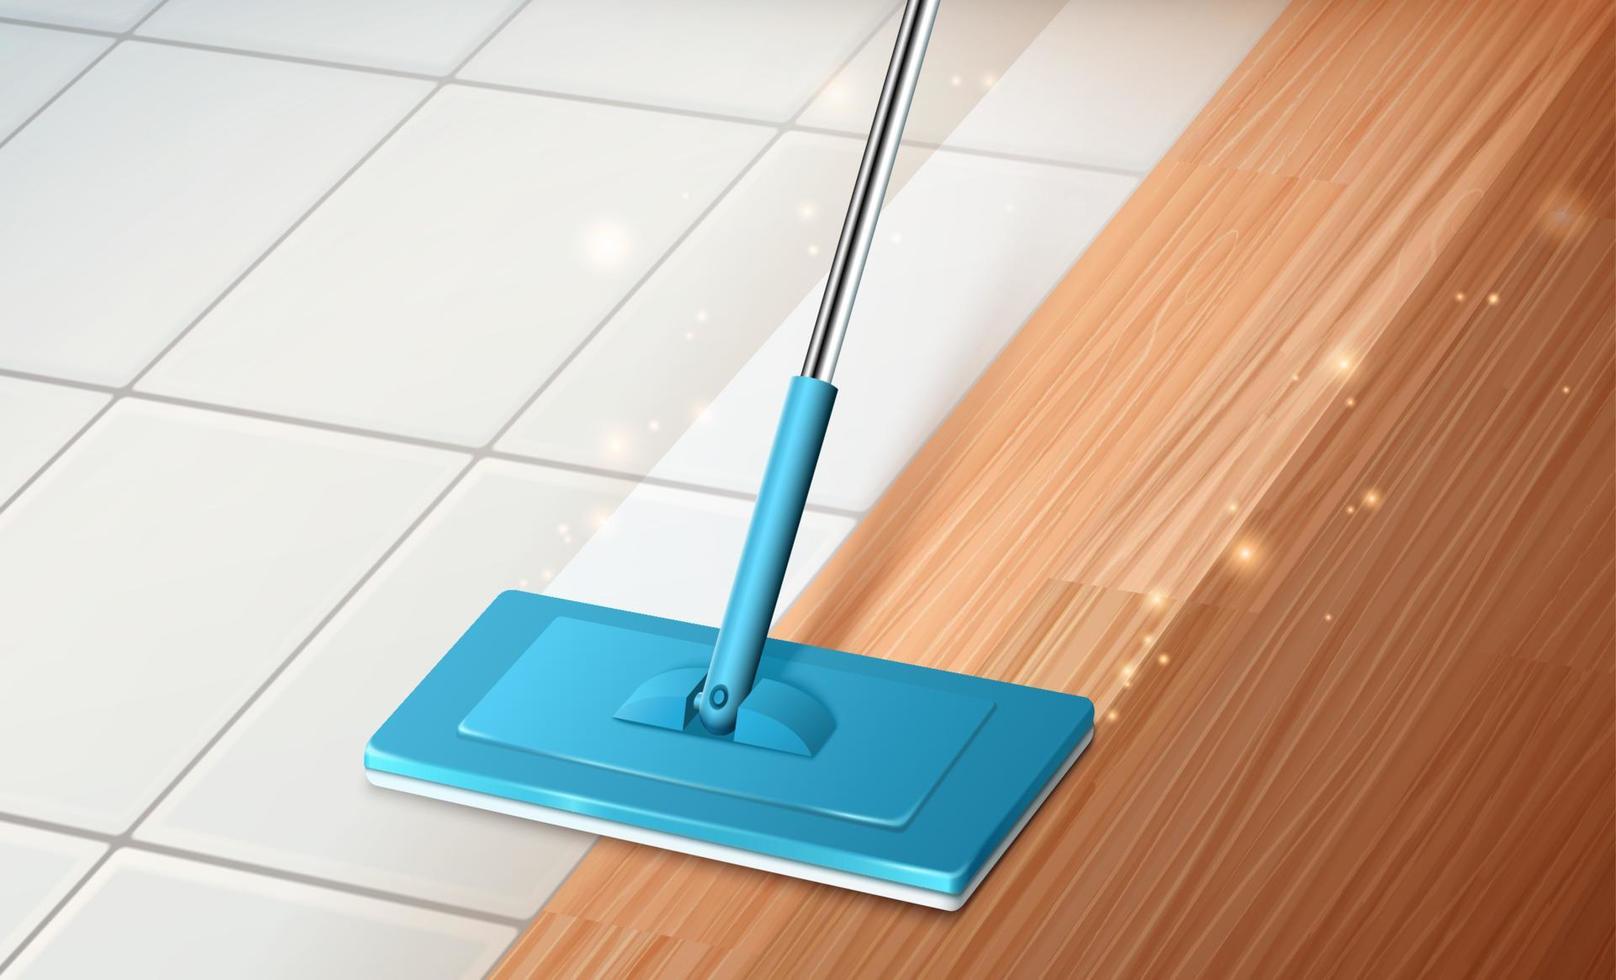 Home interior background of mop cleaning hardwood and tile floor in 3d illustration. Concept of effective cleaning and disinfection. vector